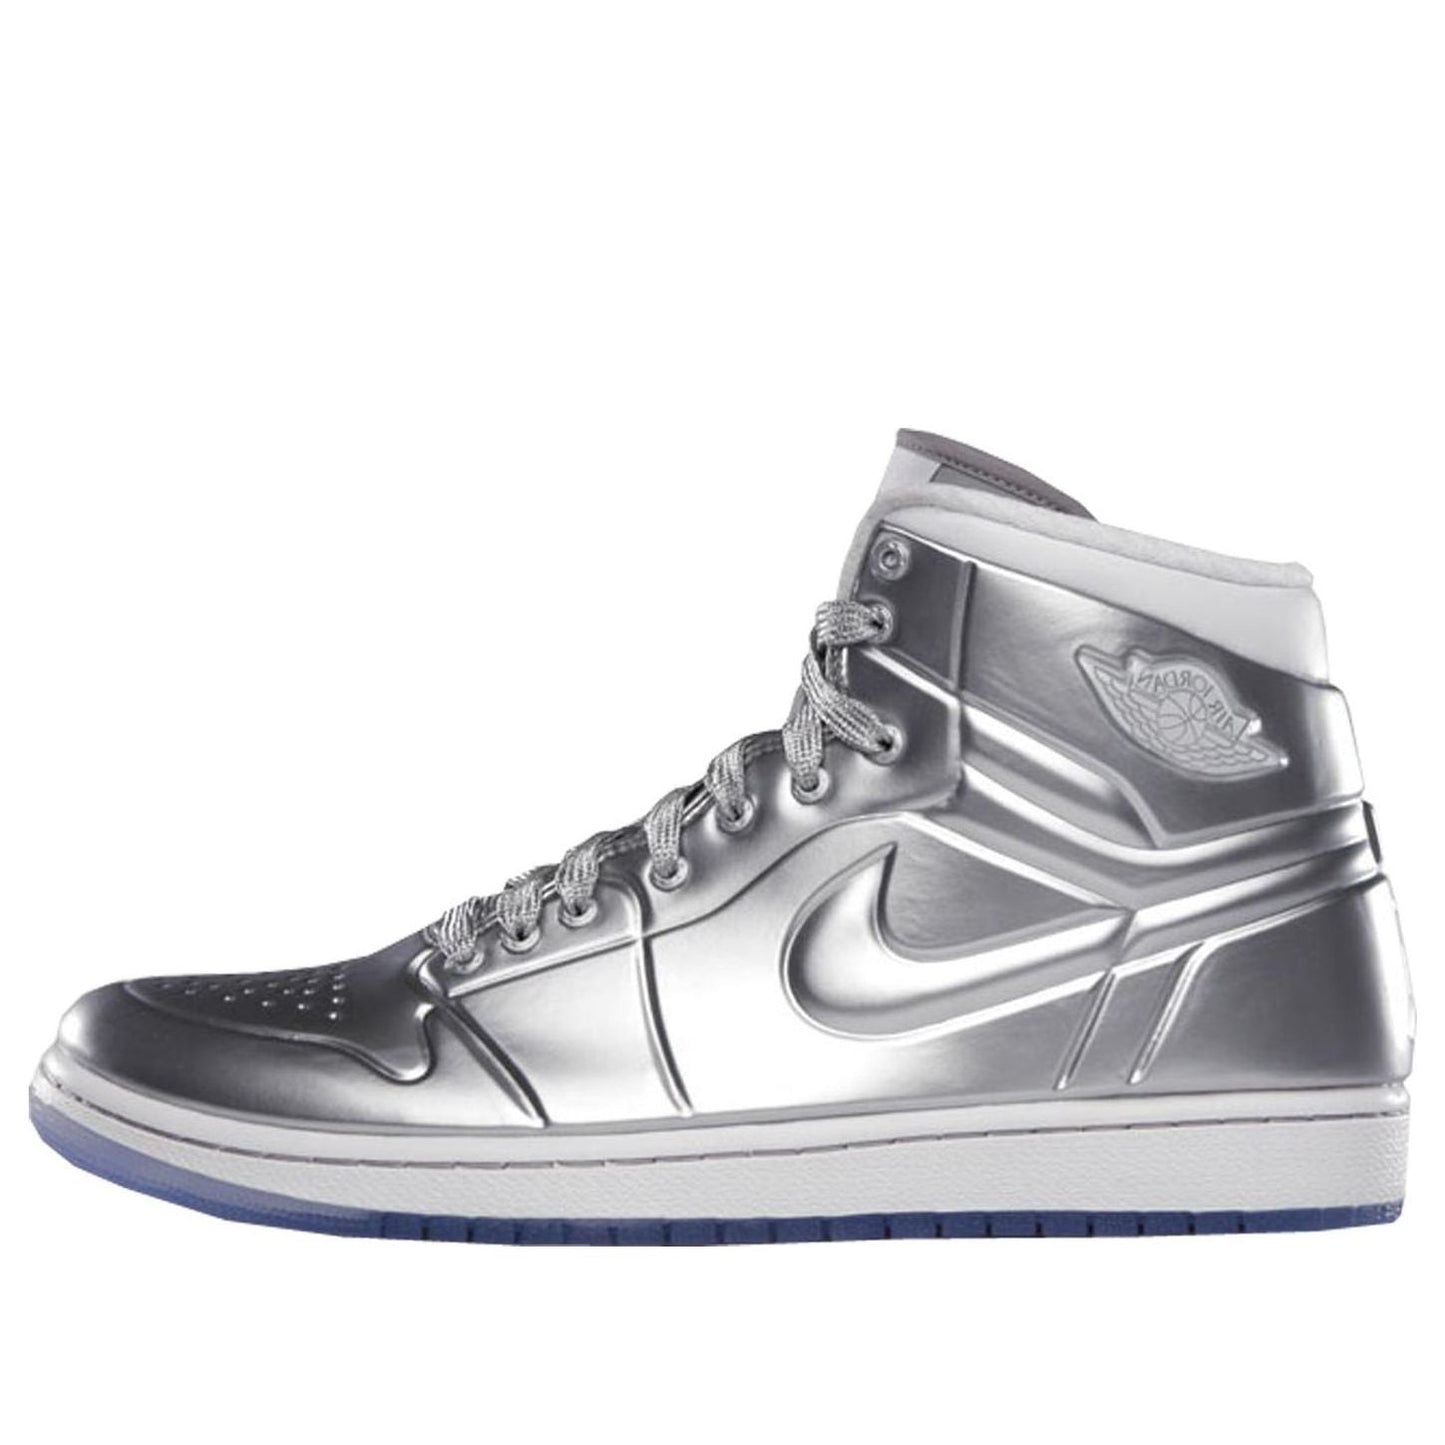 Air Jordan 1 Anodized 'Silver'  414823-001 Iconic Trainers